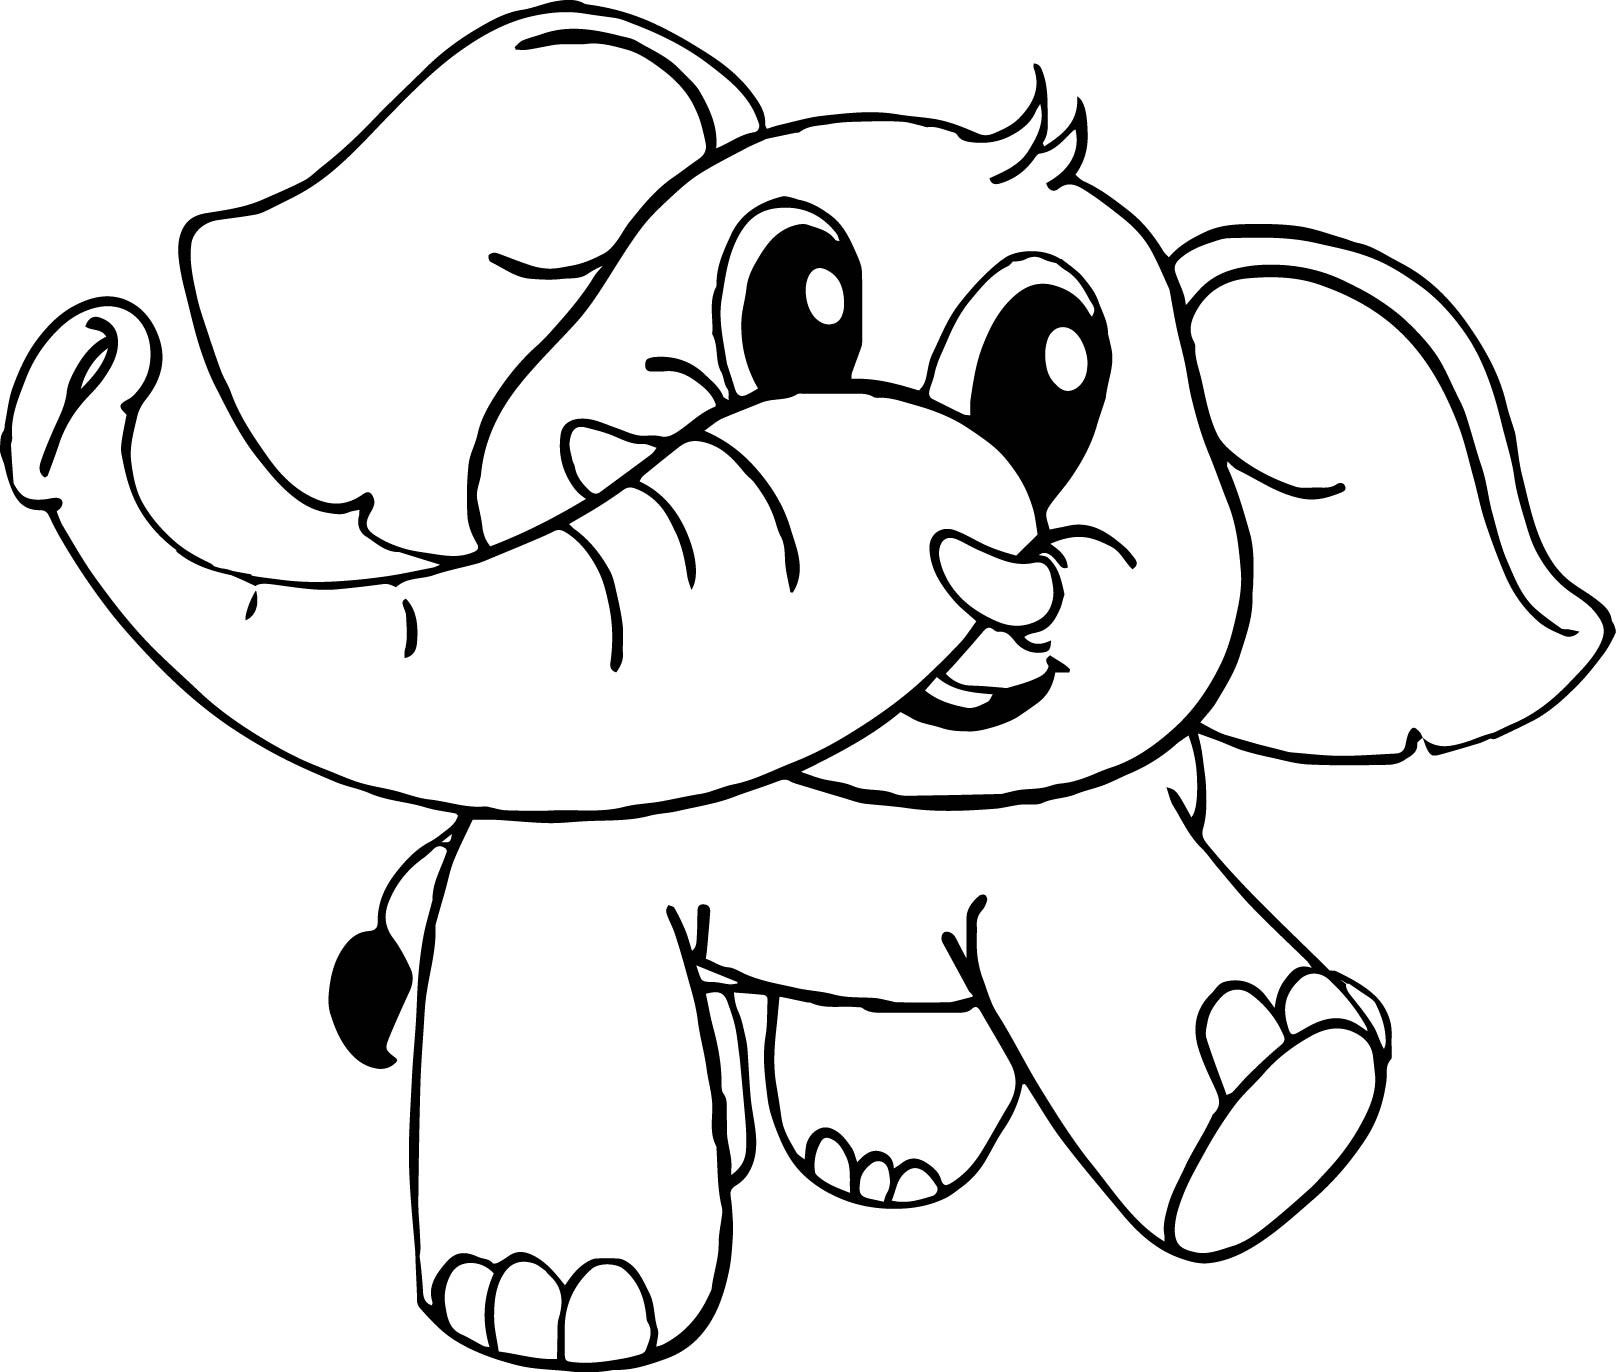 Elephant Coloring Sheet
 Baby Cartoon Elephant Coloring Page